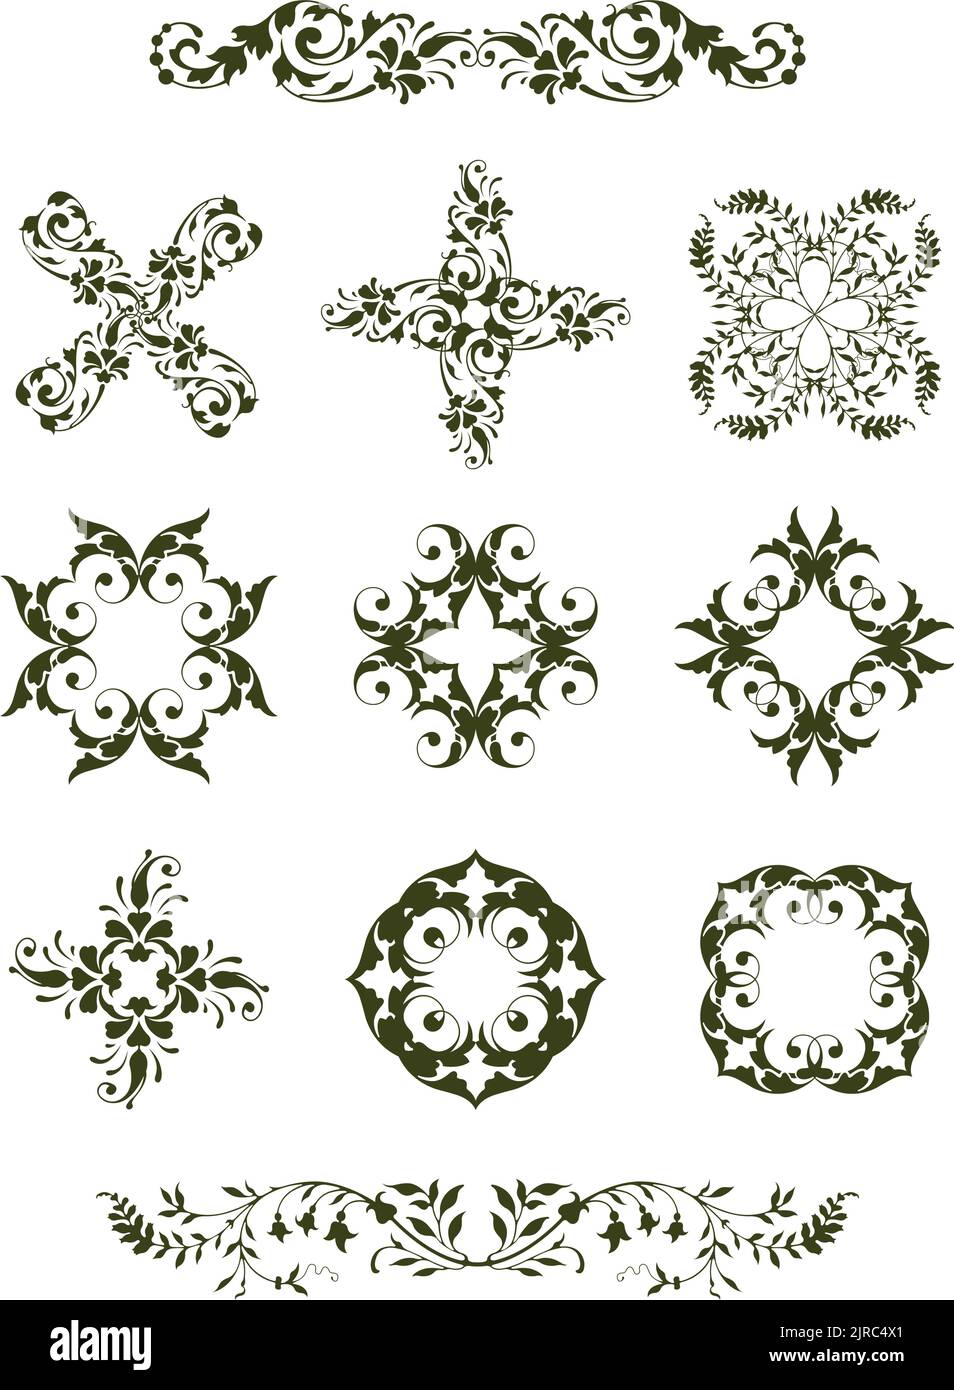 A set of vintage vector decorative leafy floral design icons. Stock Vector